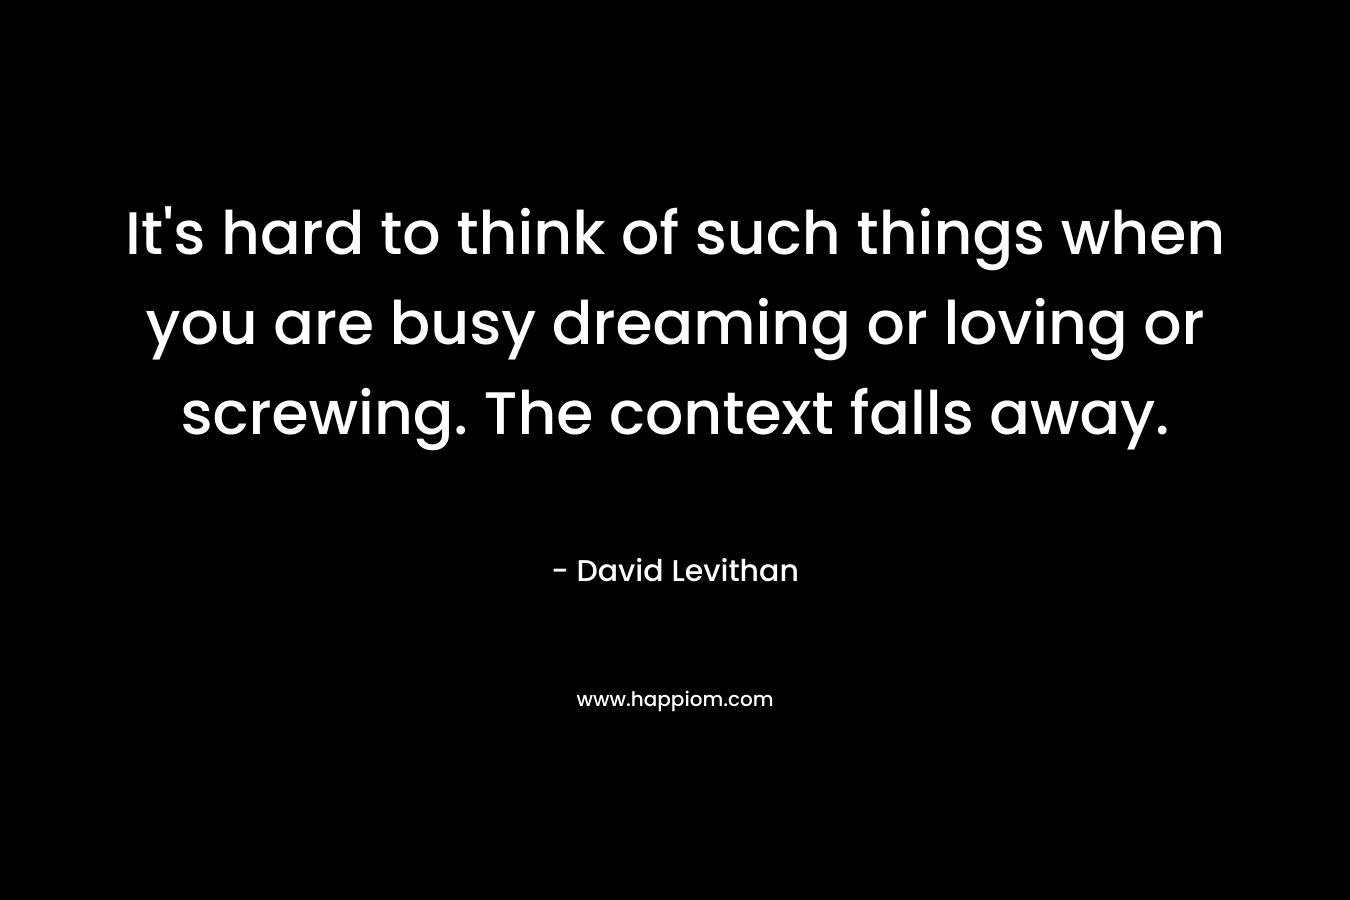 It's hard to think of such things when you are busy dreaming or loving or screwing. The context falls away.